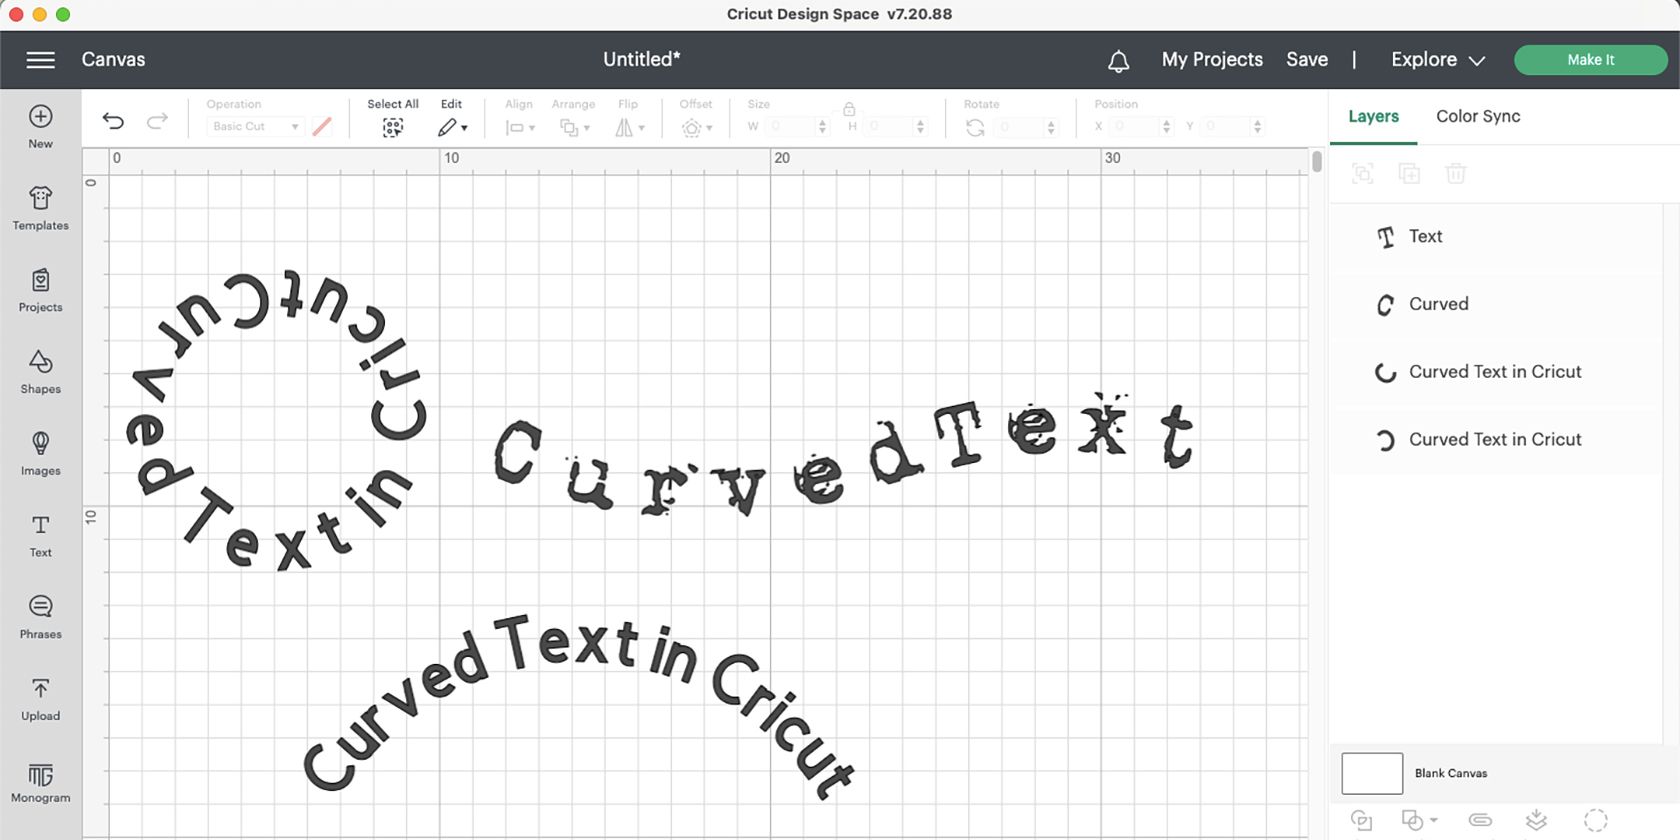 Cricut Design Space app with various curved texts.